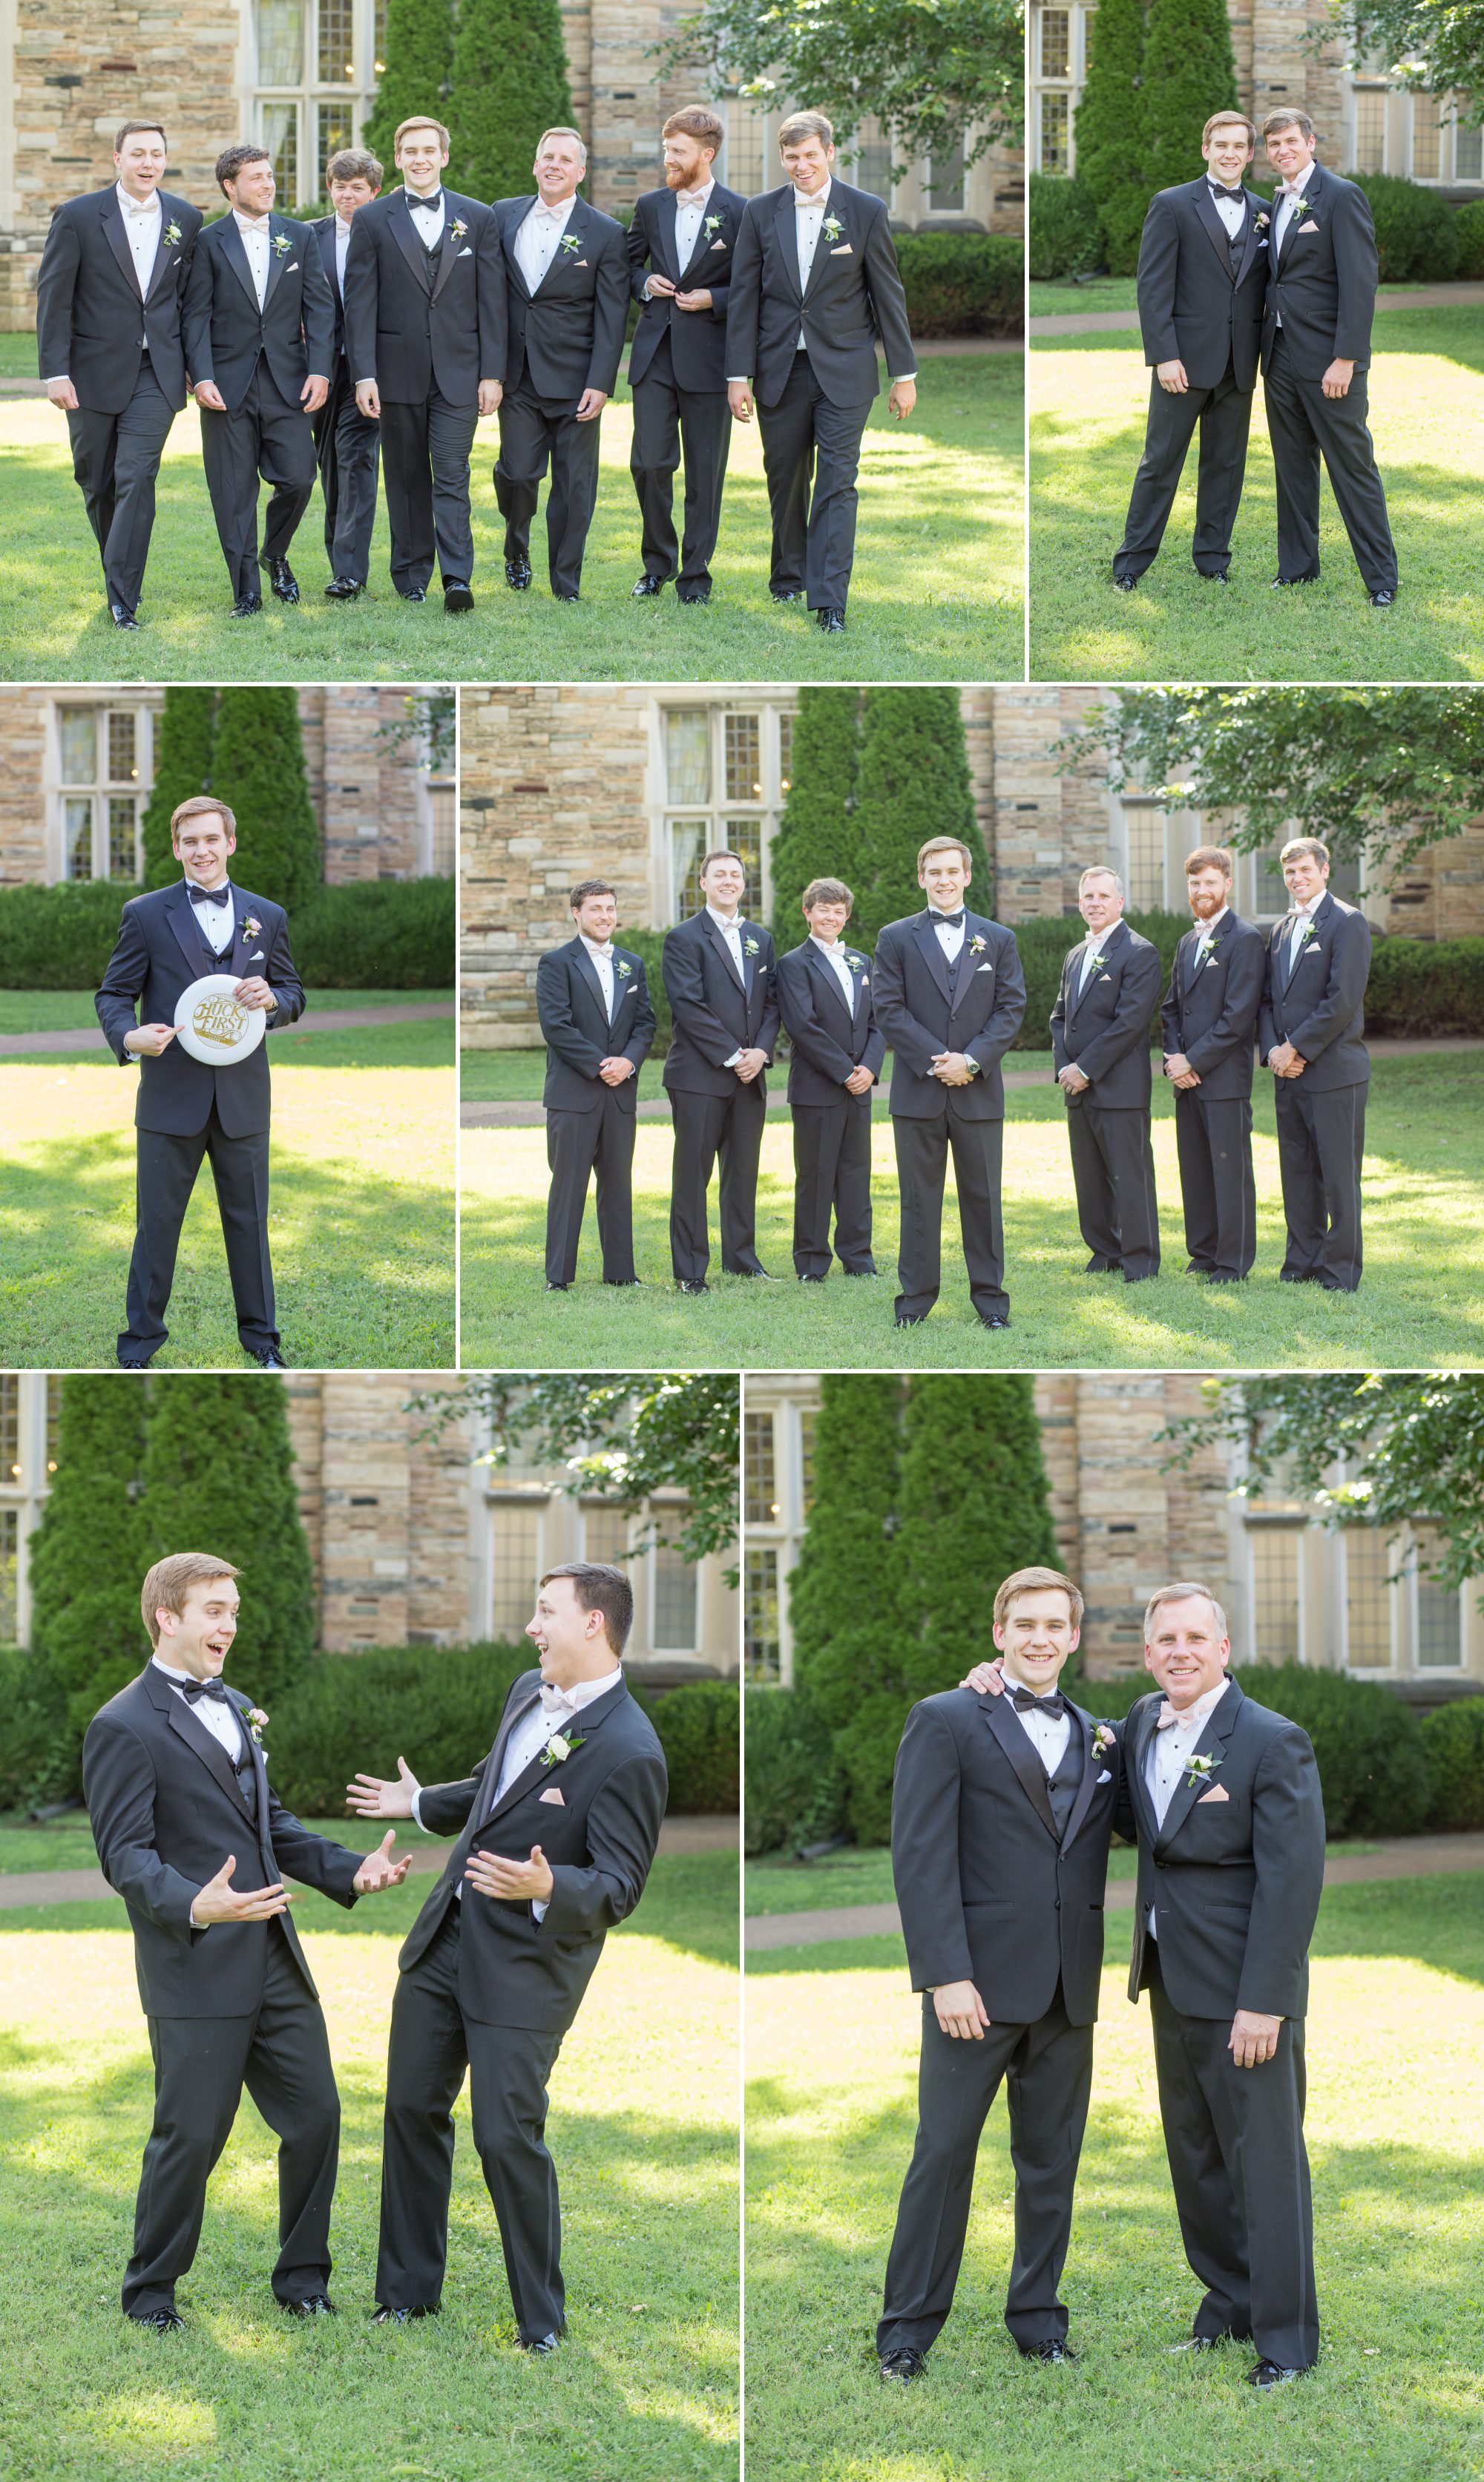 Groomsmen throw a frisbee and take photos - Wightman Chapel at Scarritt Bennett before summer wedding ceremony in Nashville, TN. Photography by Krista Lee Photography.